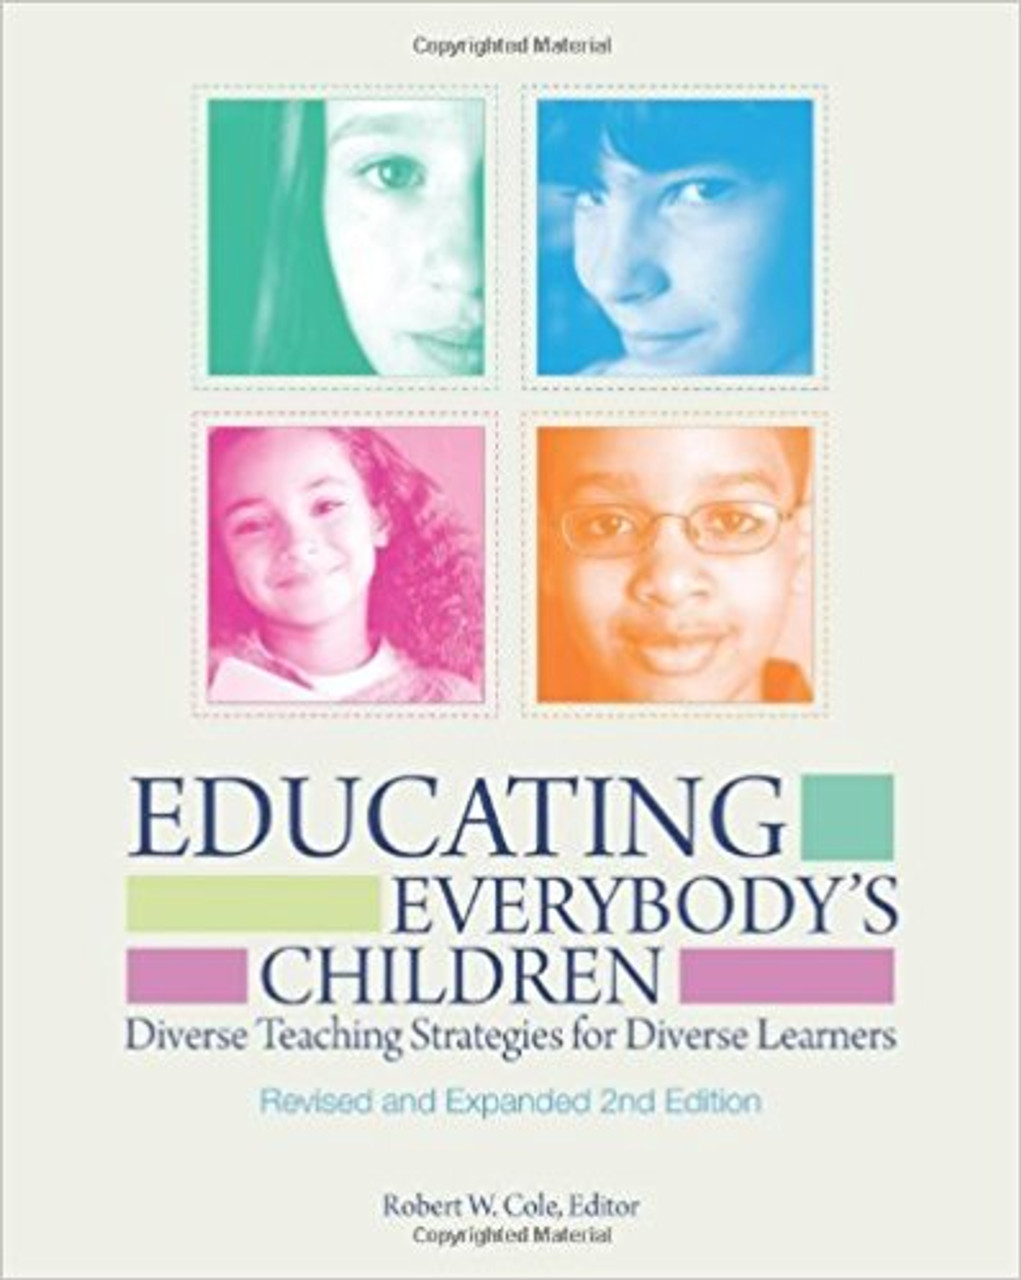 Designed to promote reflection, discussion, and action among the entire learning community, Educating Everybody's Children encapsulates what research has revealed about successfully addressing the needs of students from economically, ethnically, culturally, and linguistically diverse groups and identifies a wide range of effective principles and instructional strategies.